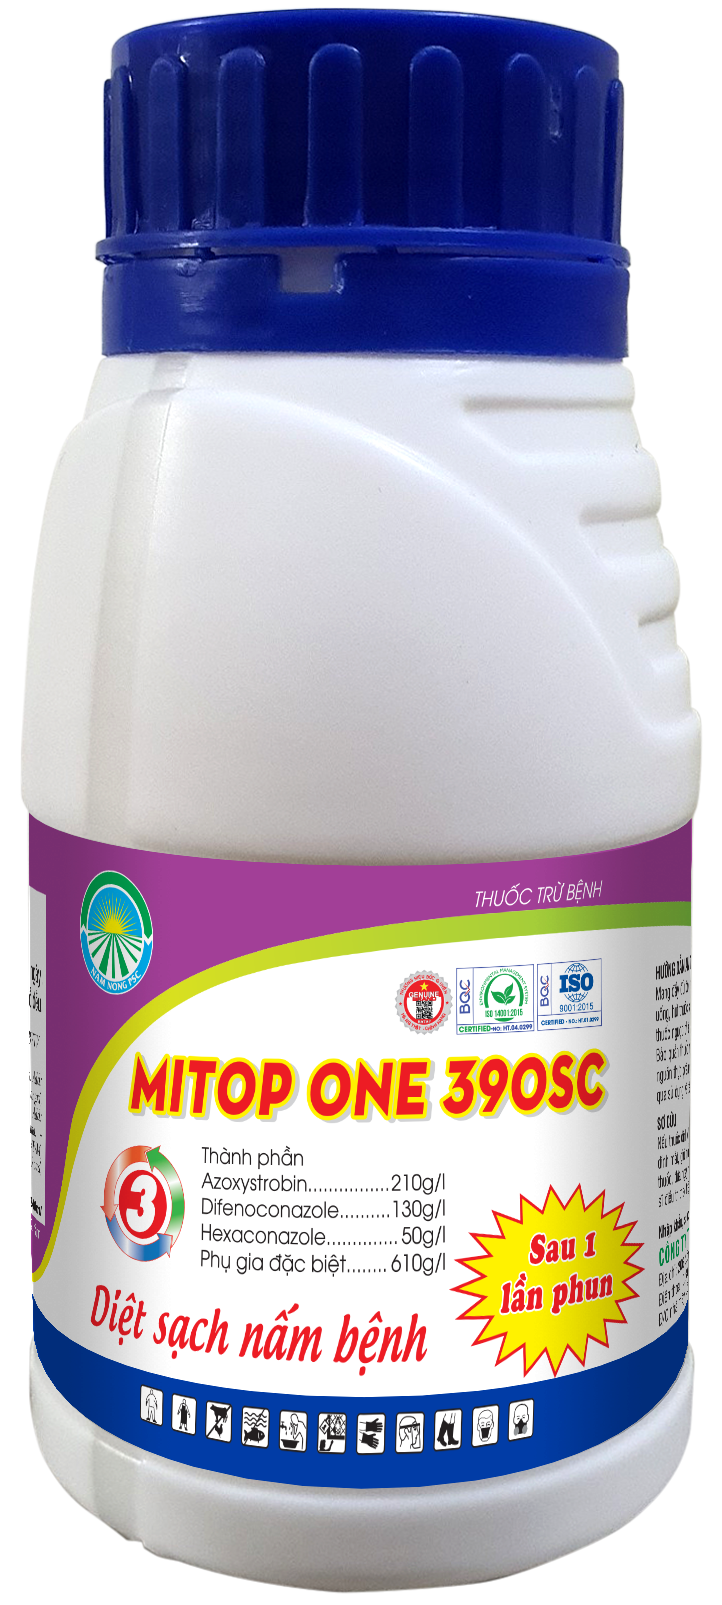 MITOP ONE 390SC